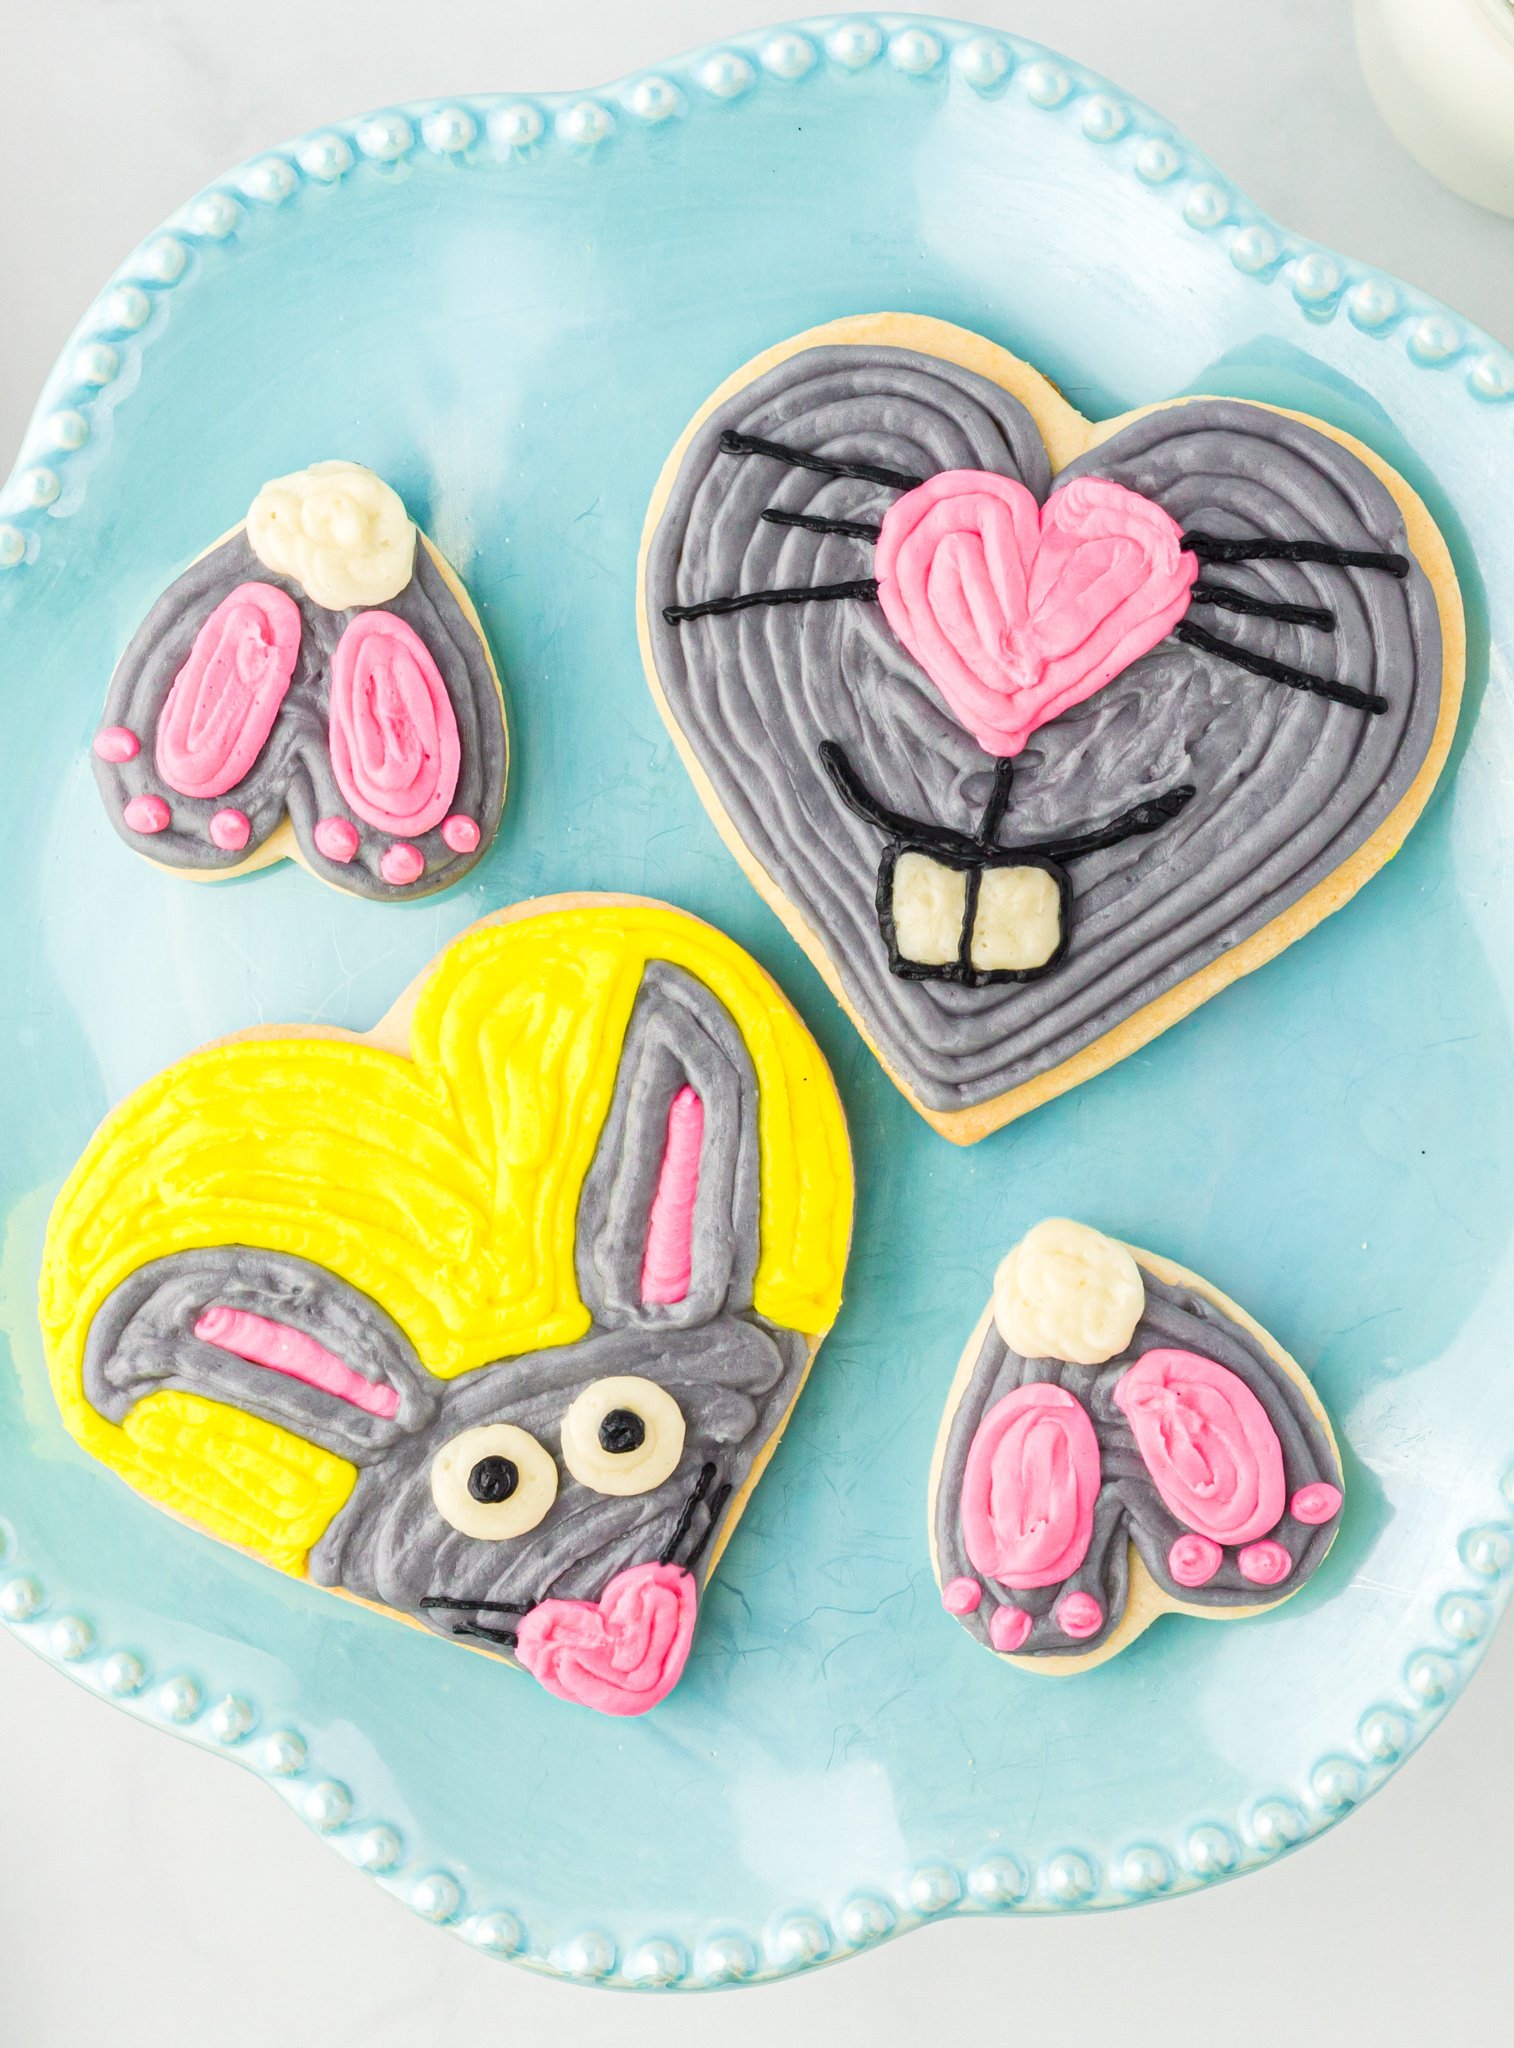 Adorable bunny butter sculptures are perfect for your Easter table